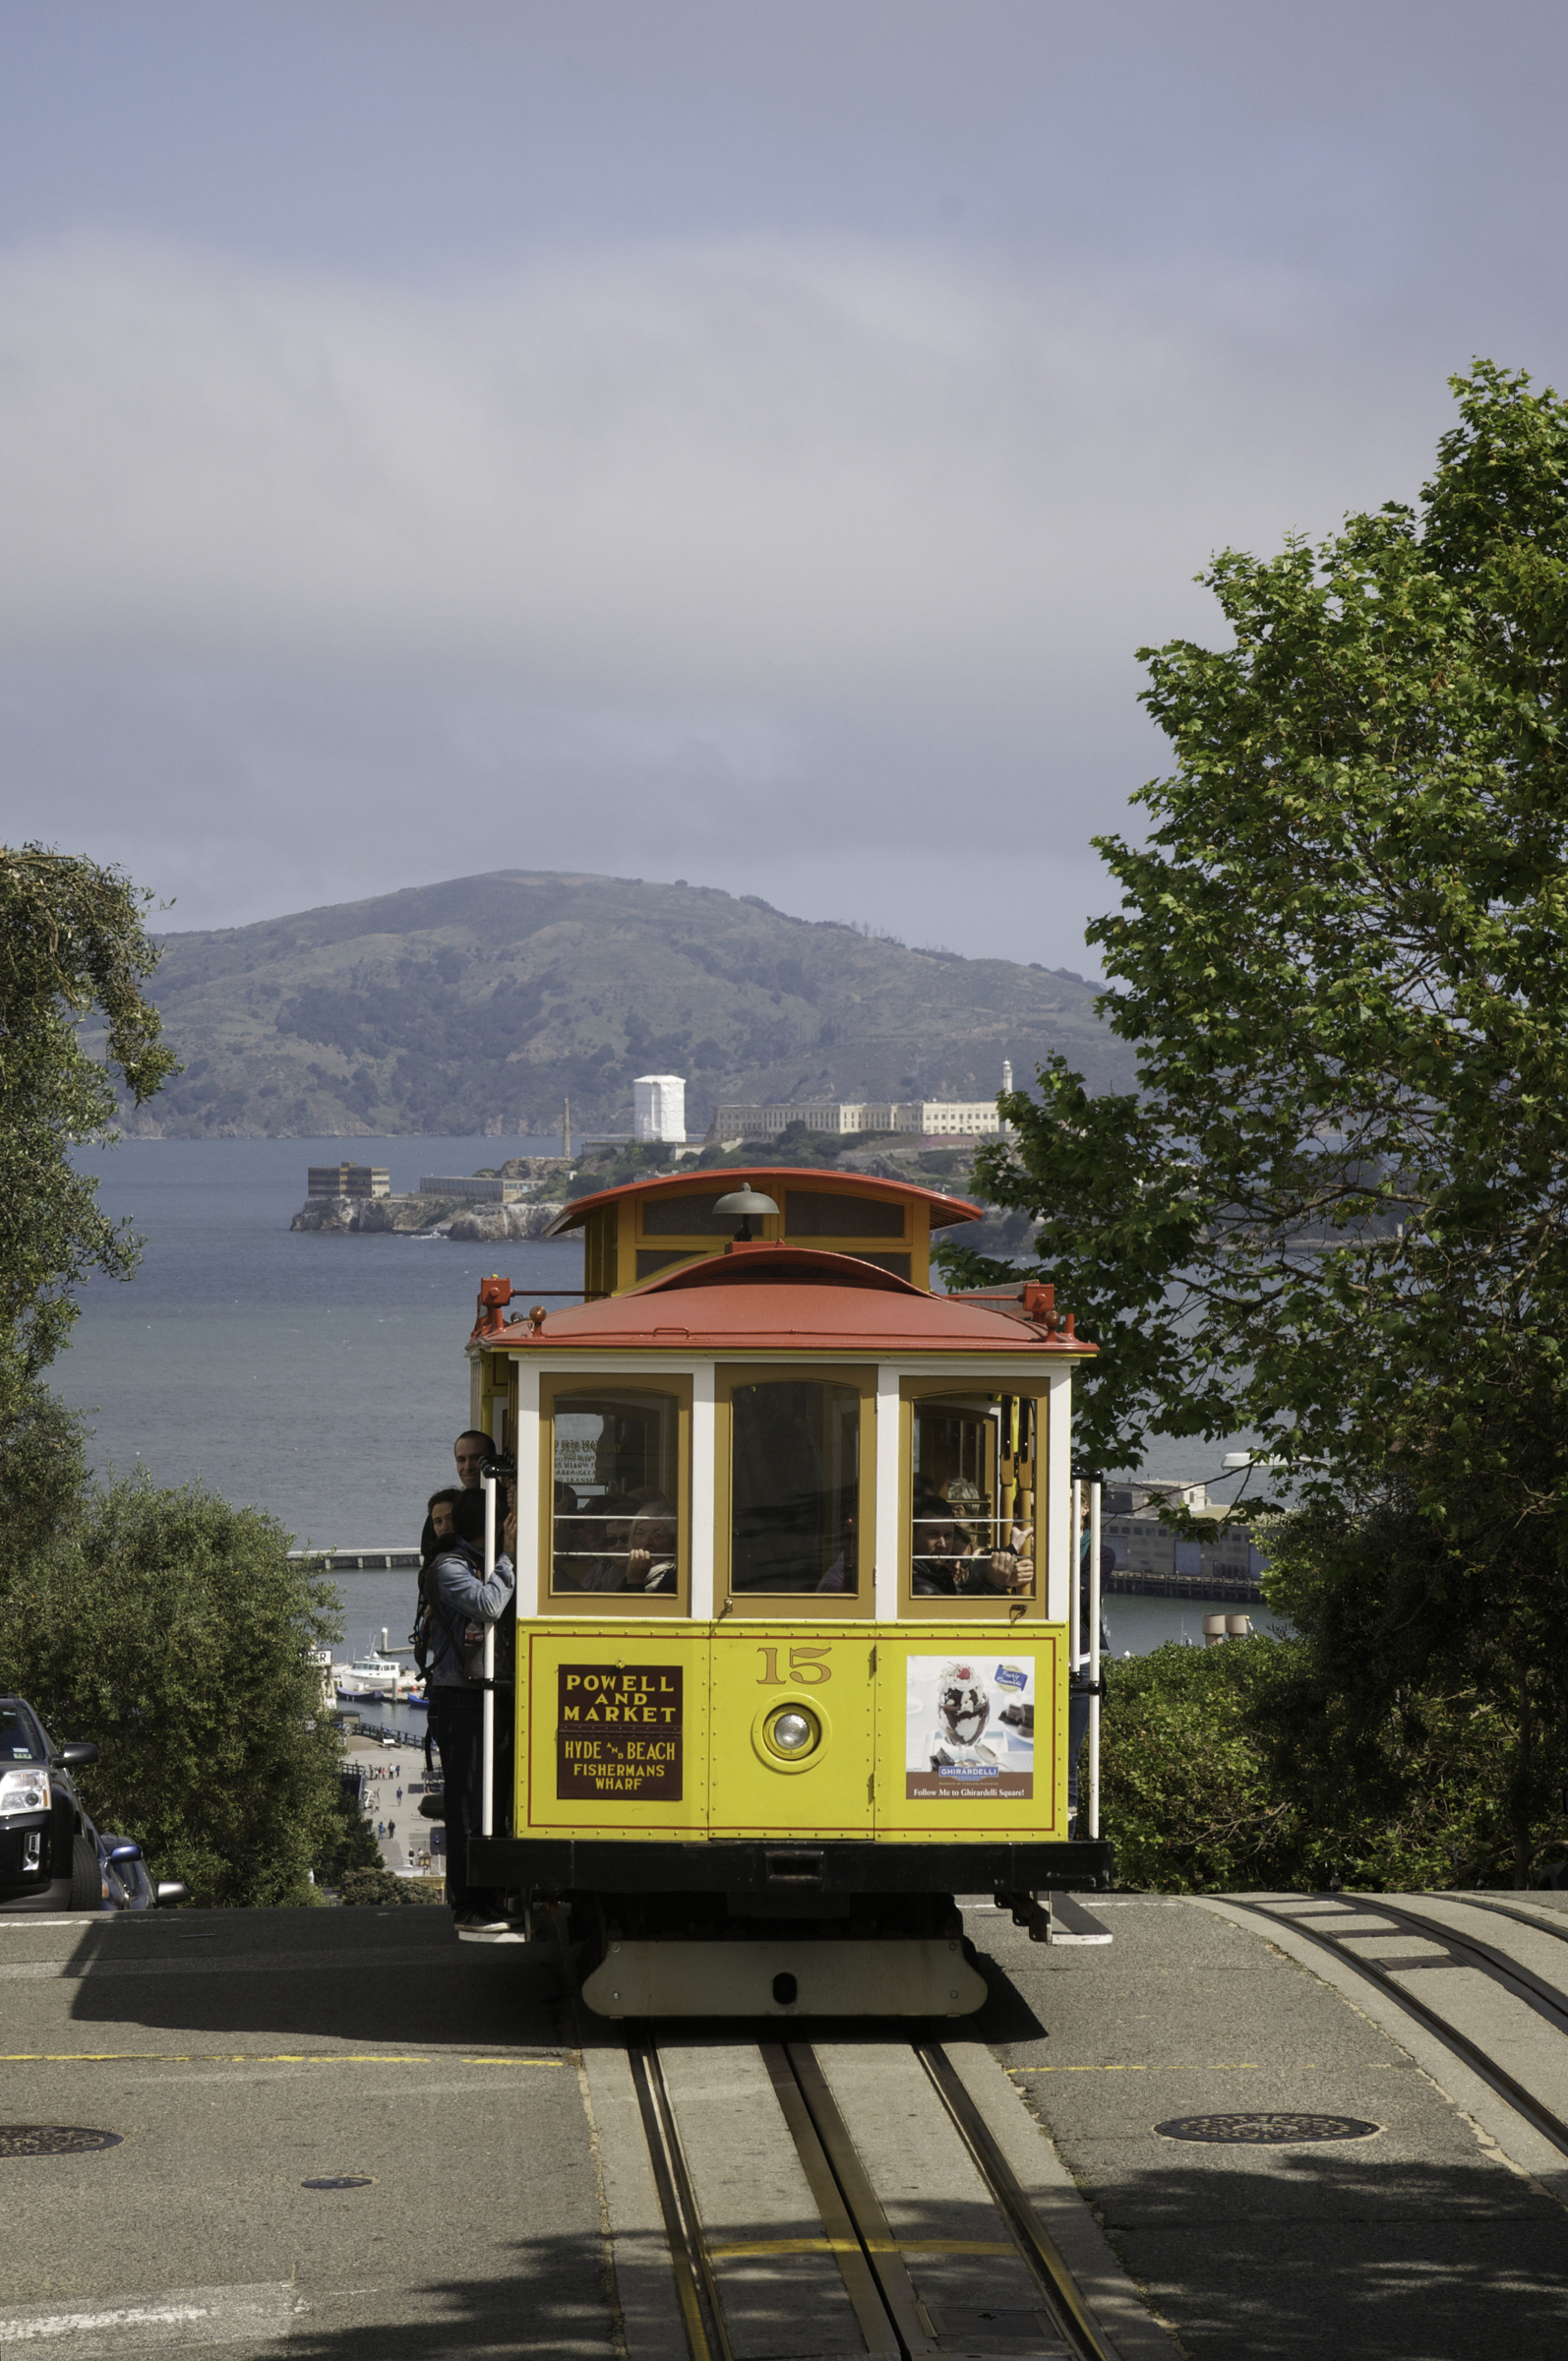 Powell Hyde Cable Car travelling towards downtown.